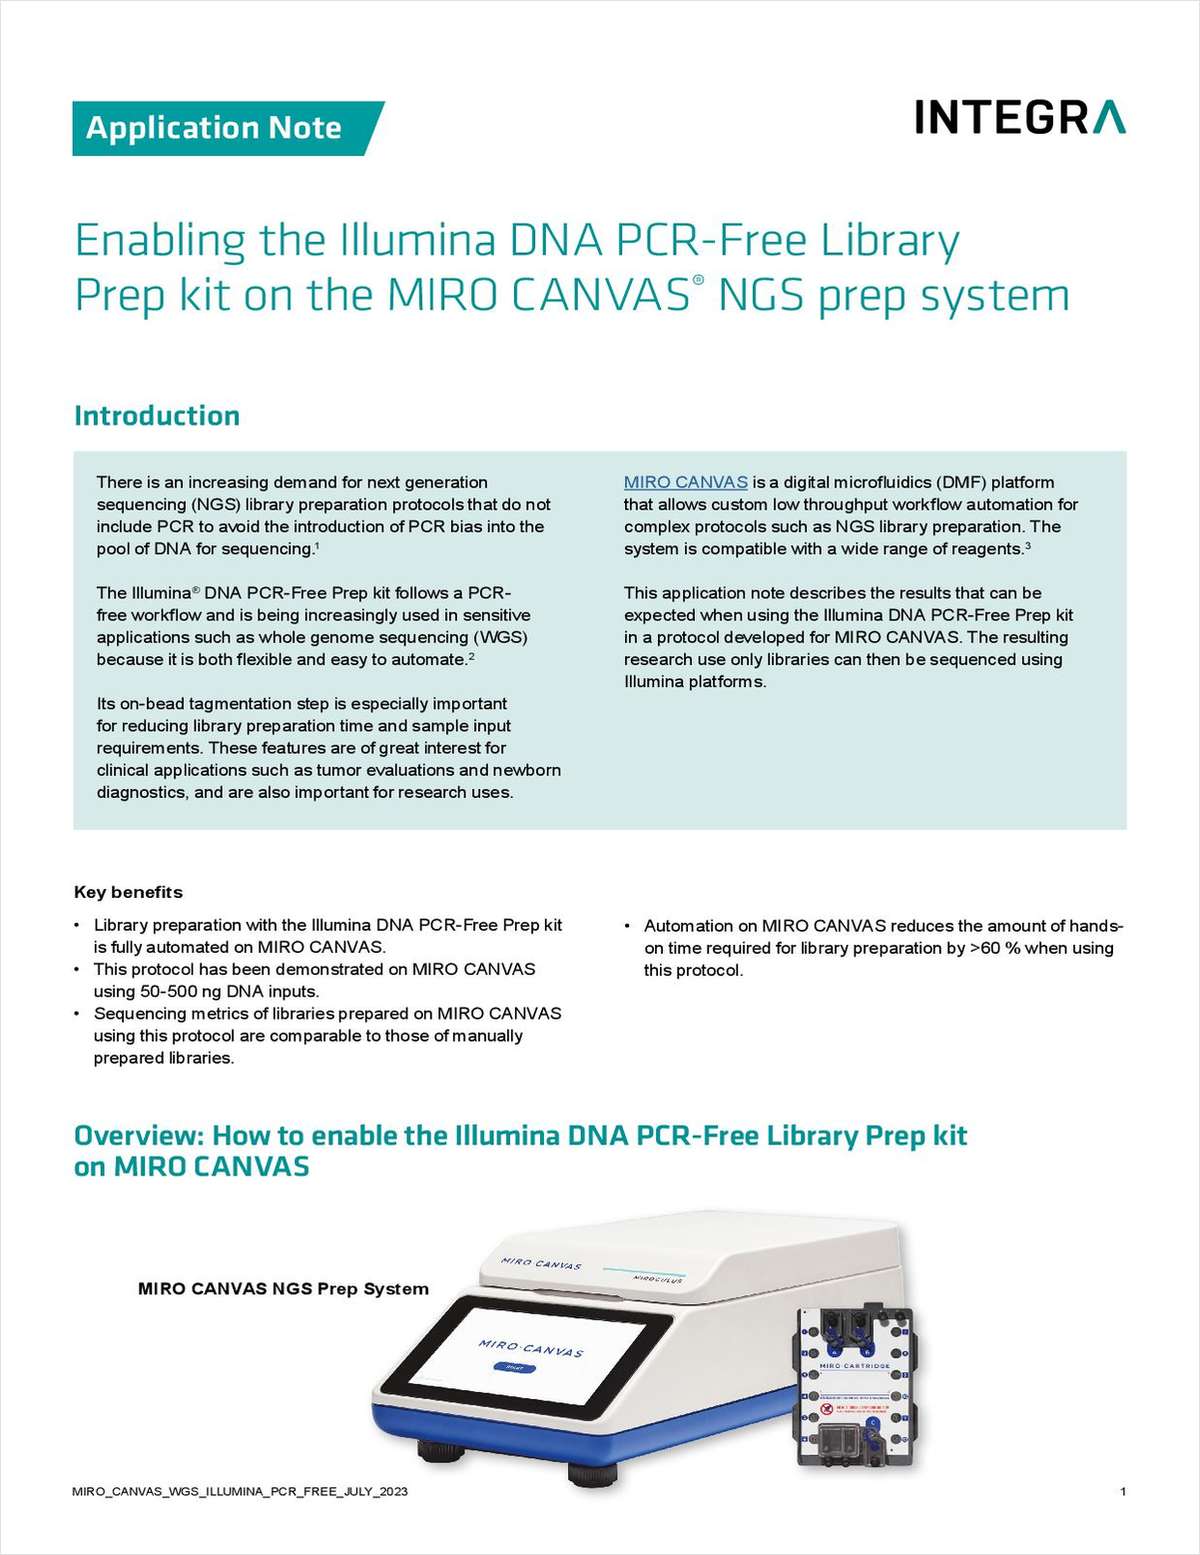 Enabling the Illumina DNA PCR-Free Library Prep Kit on the Miro Canvas NGS Prep System